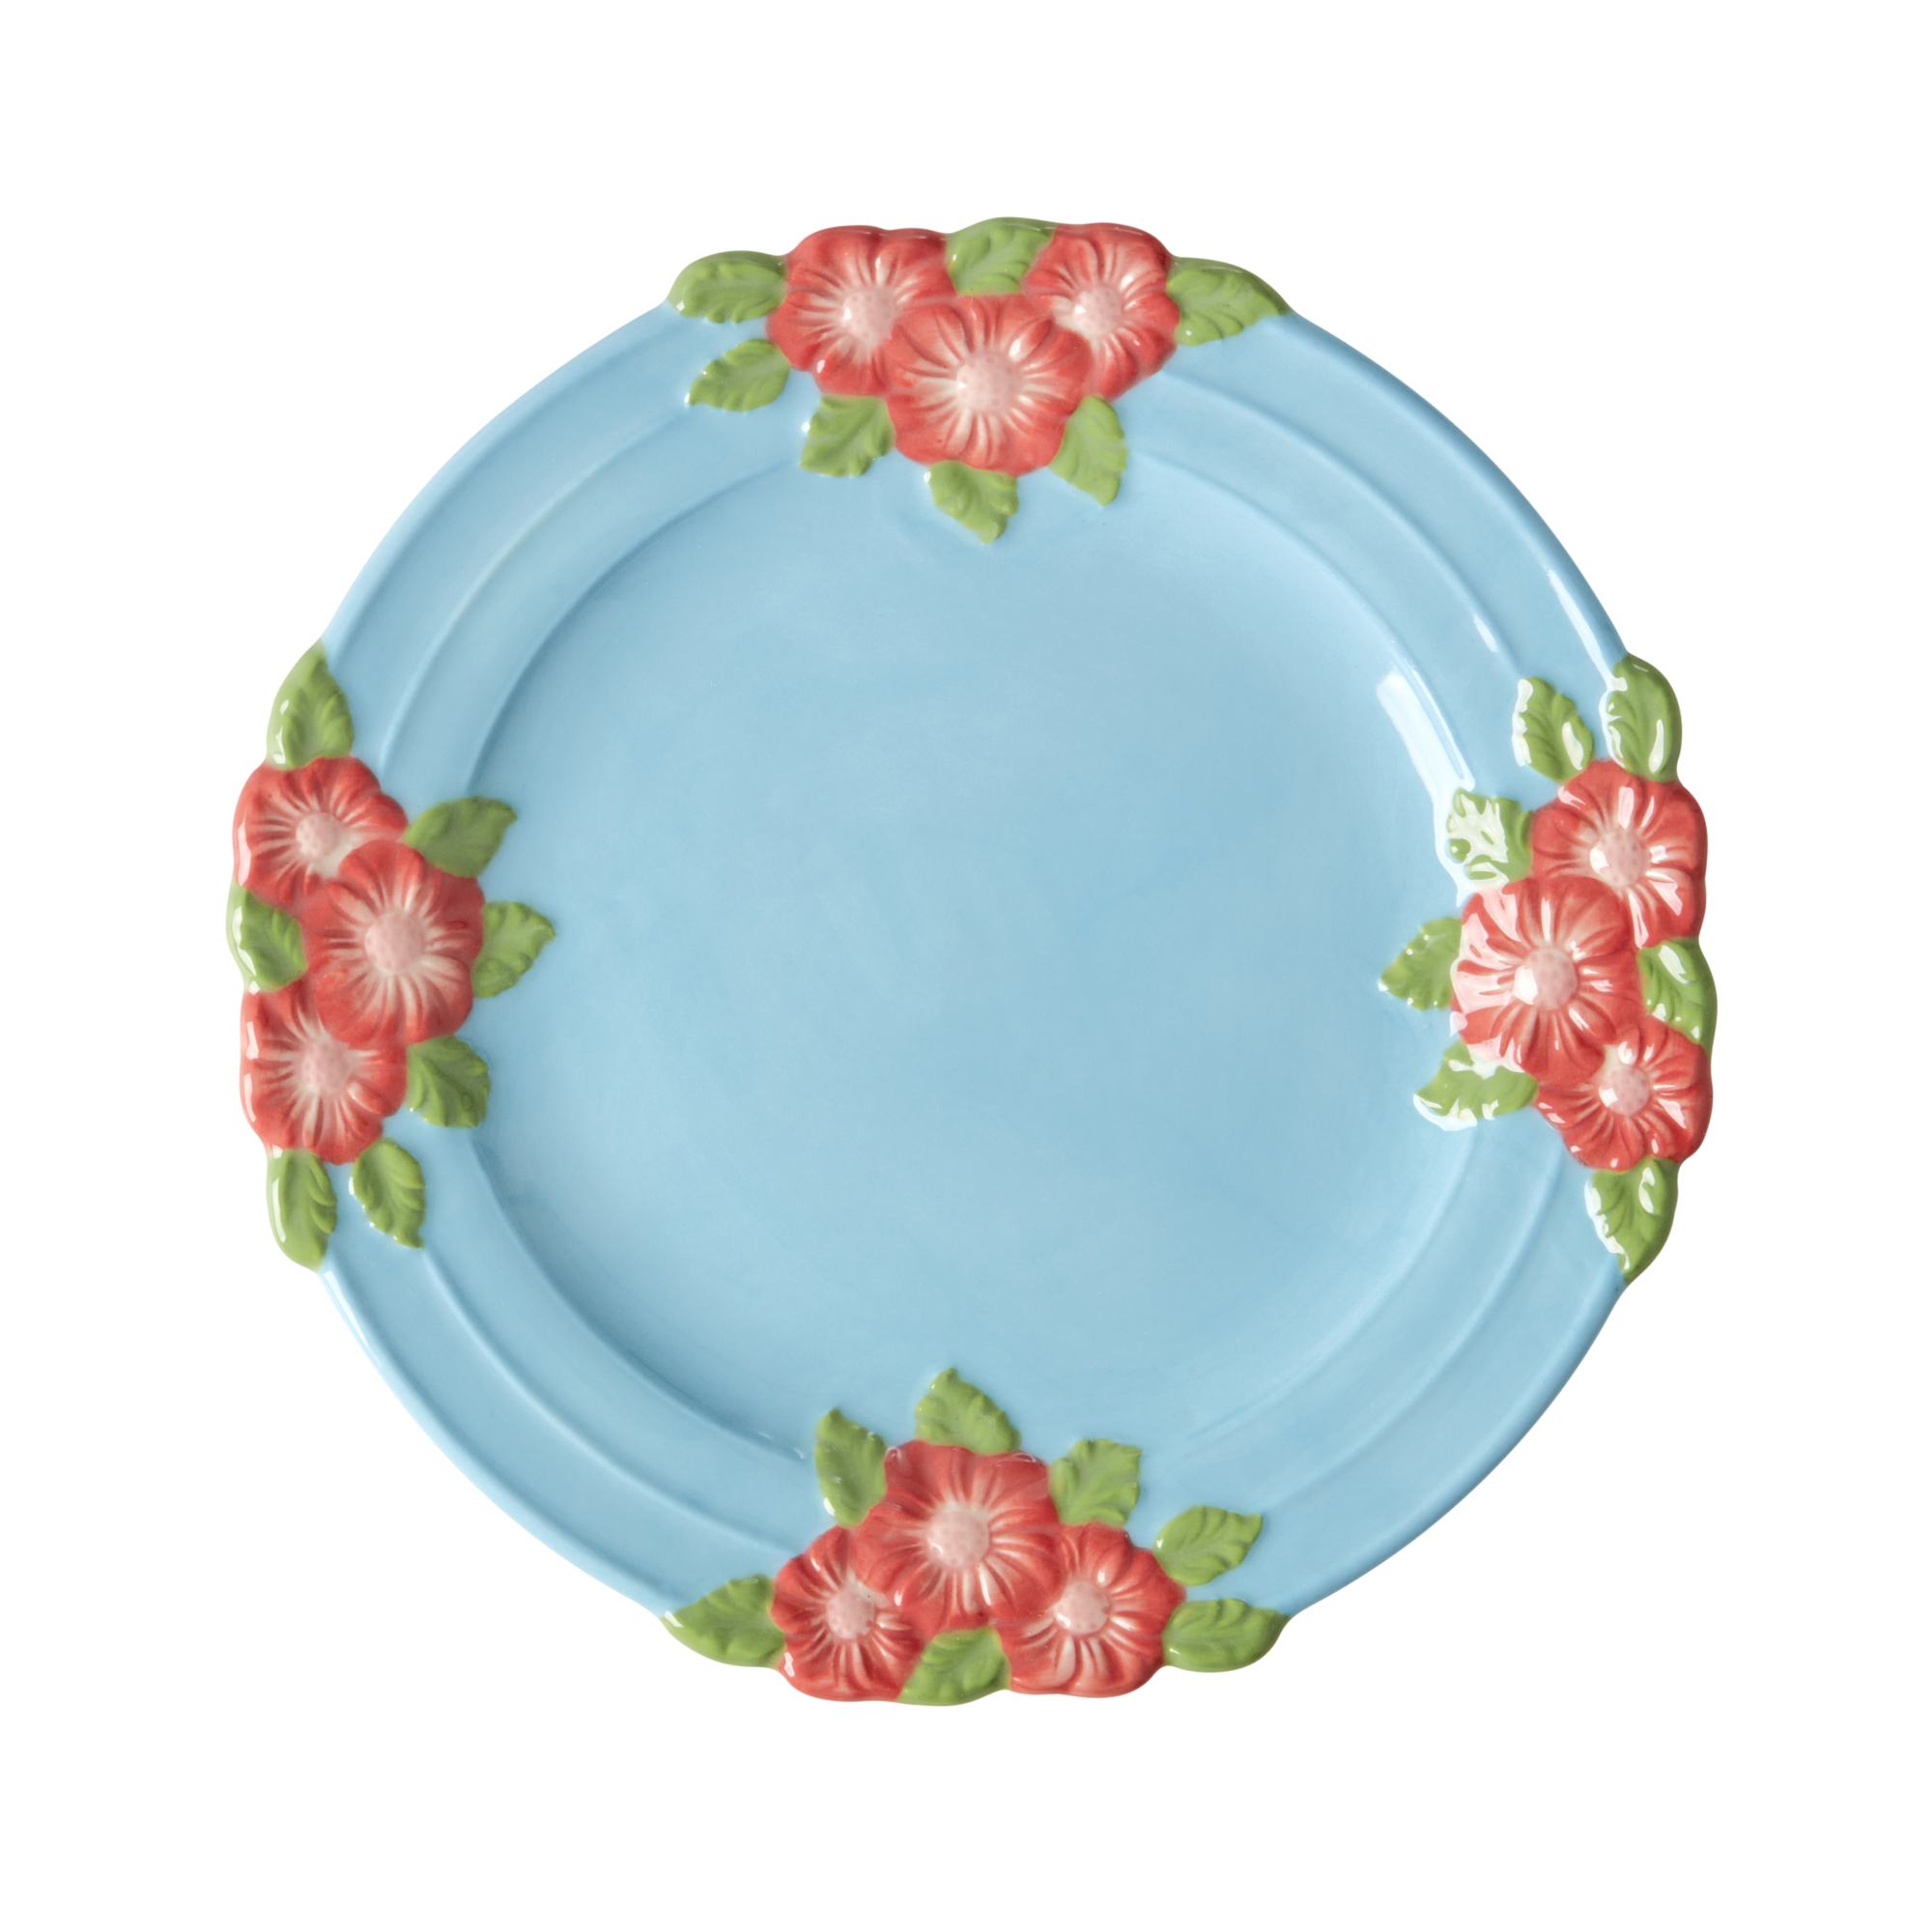 Rice - Ceramic Lunch Plate w. Embossed Flower Design - Mint